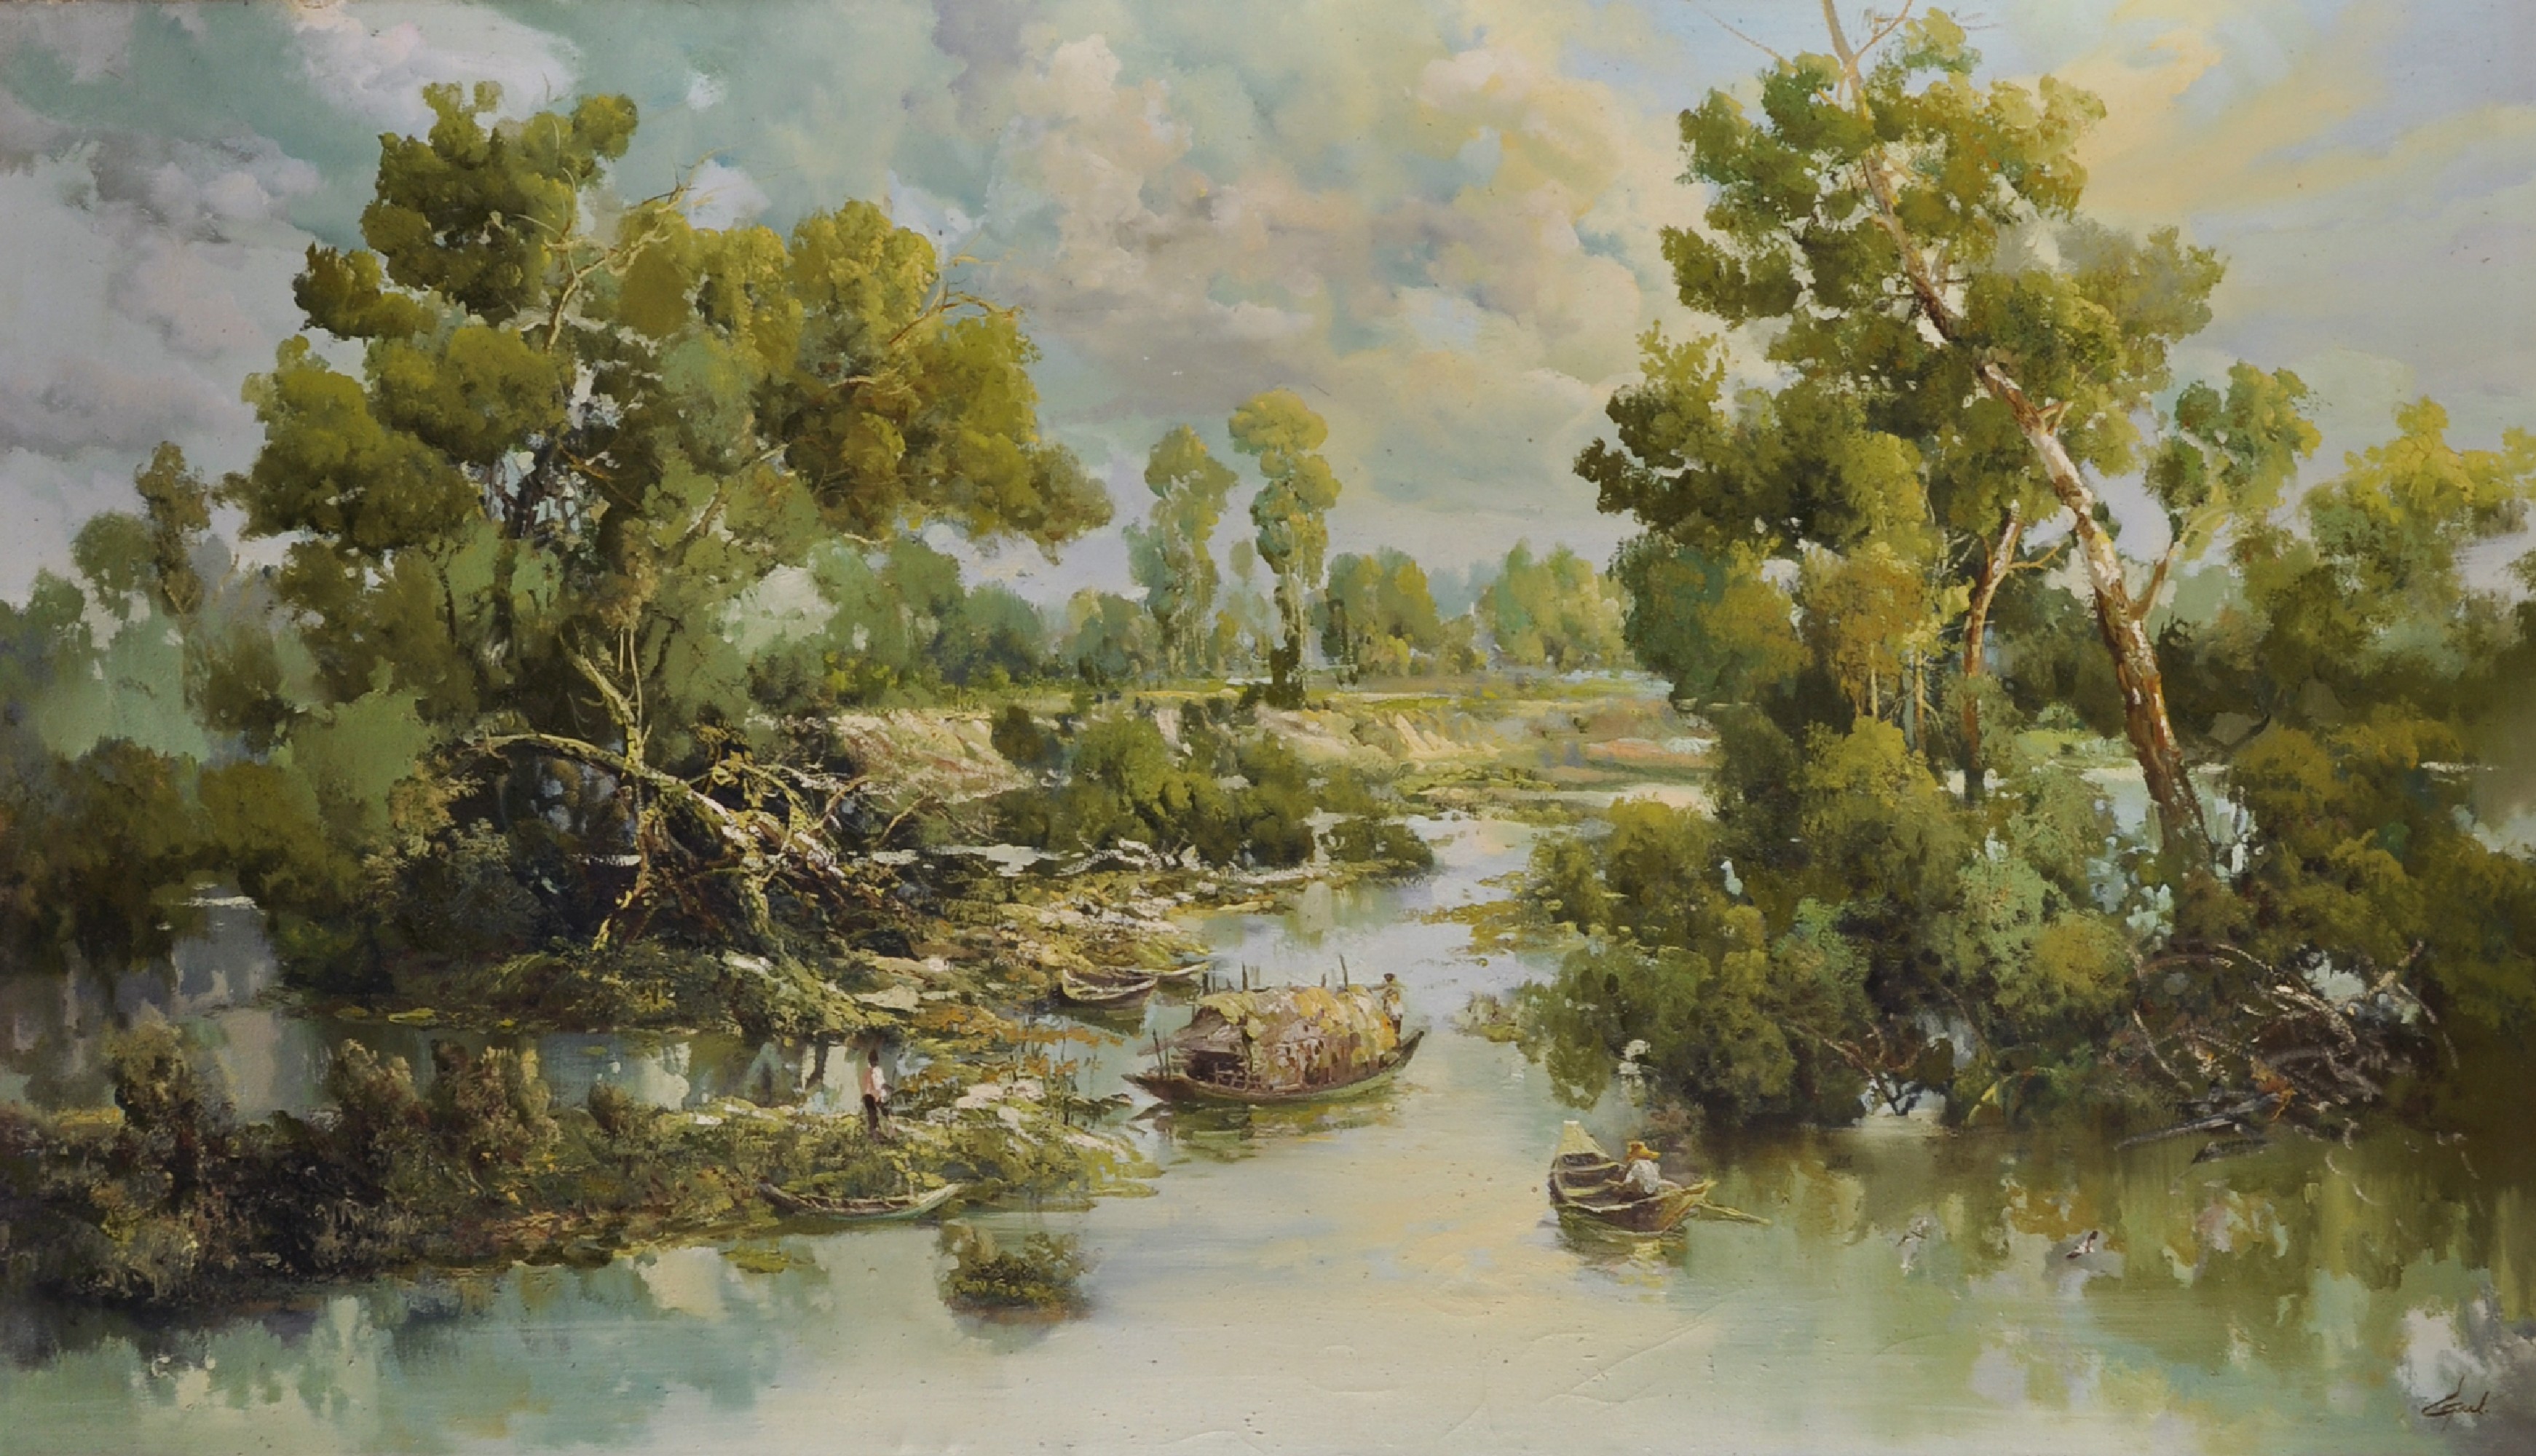 20th Century Asian School. A River Landscape, with Figures in Boats, Oil on Canvas, Signed,